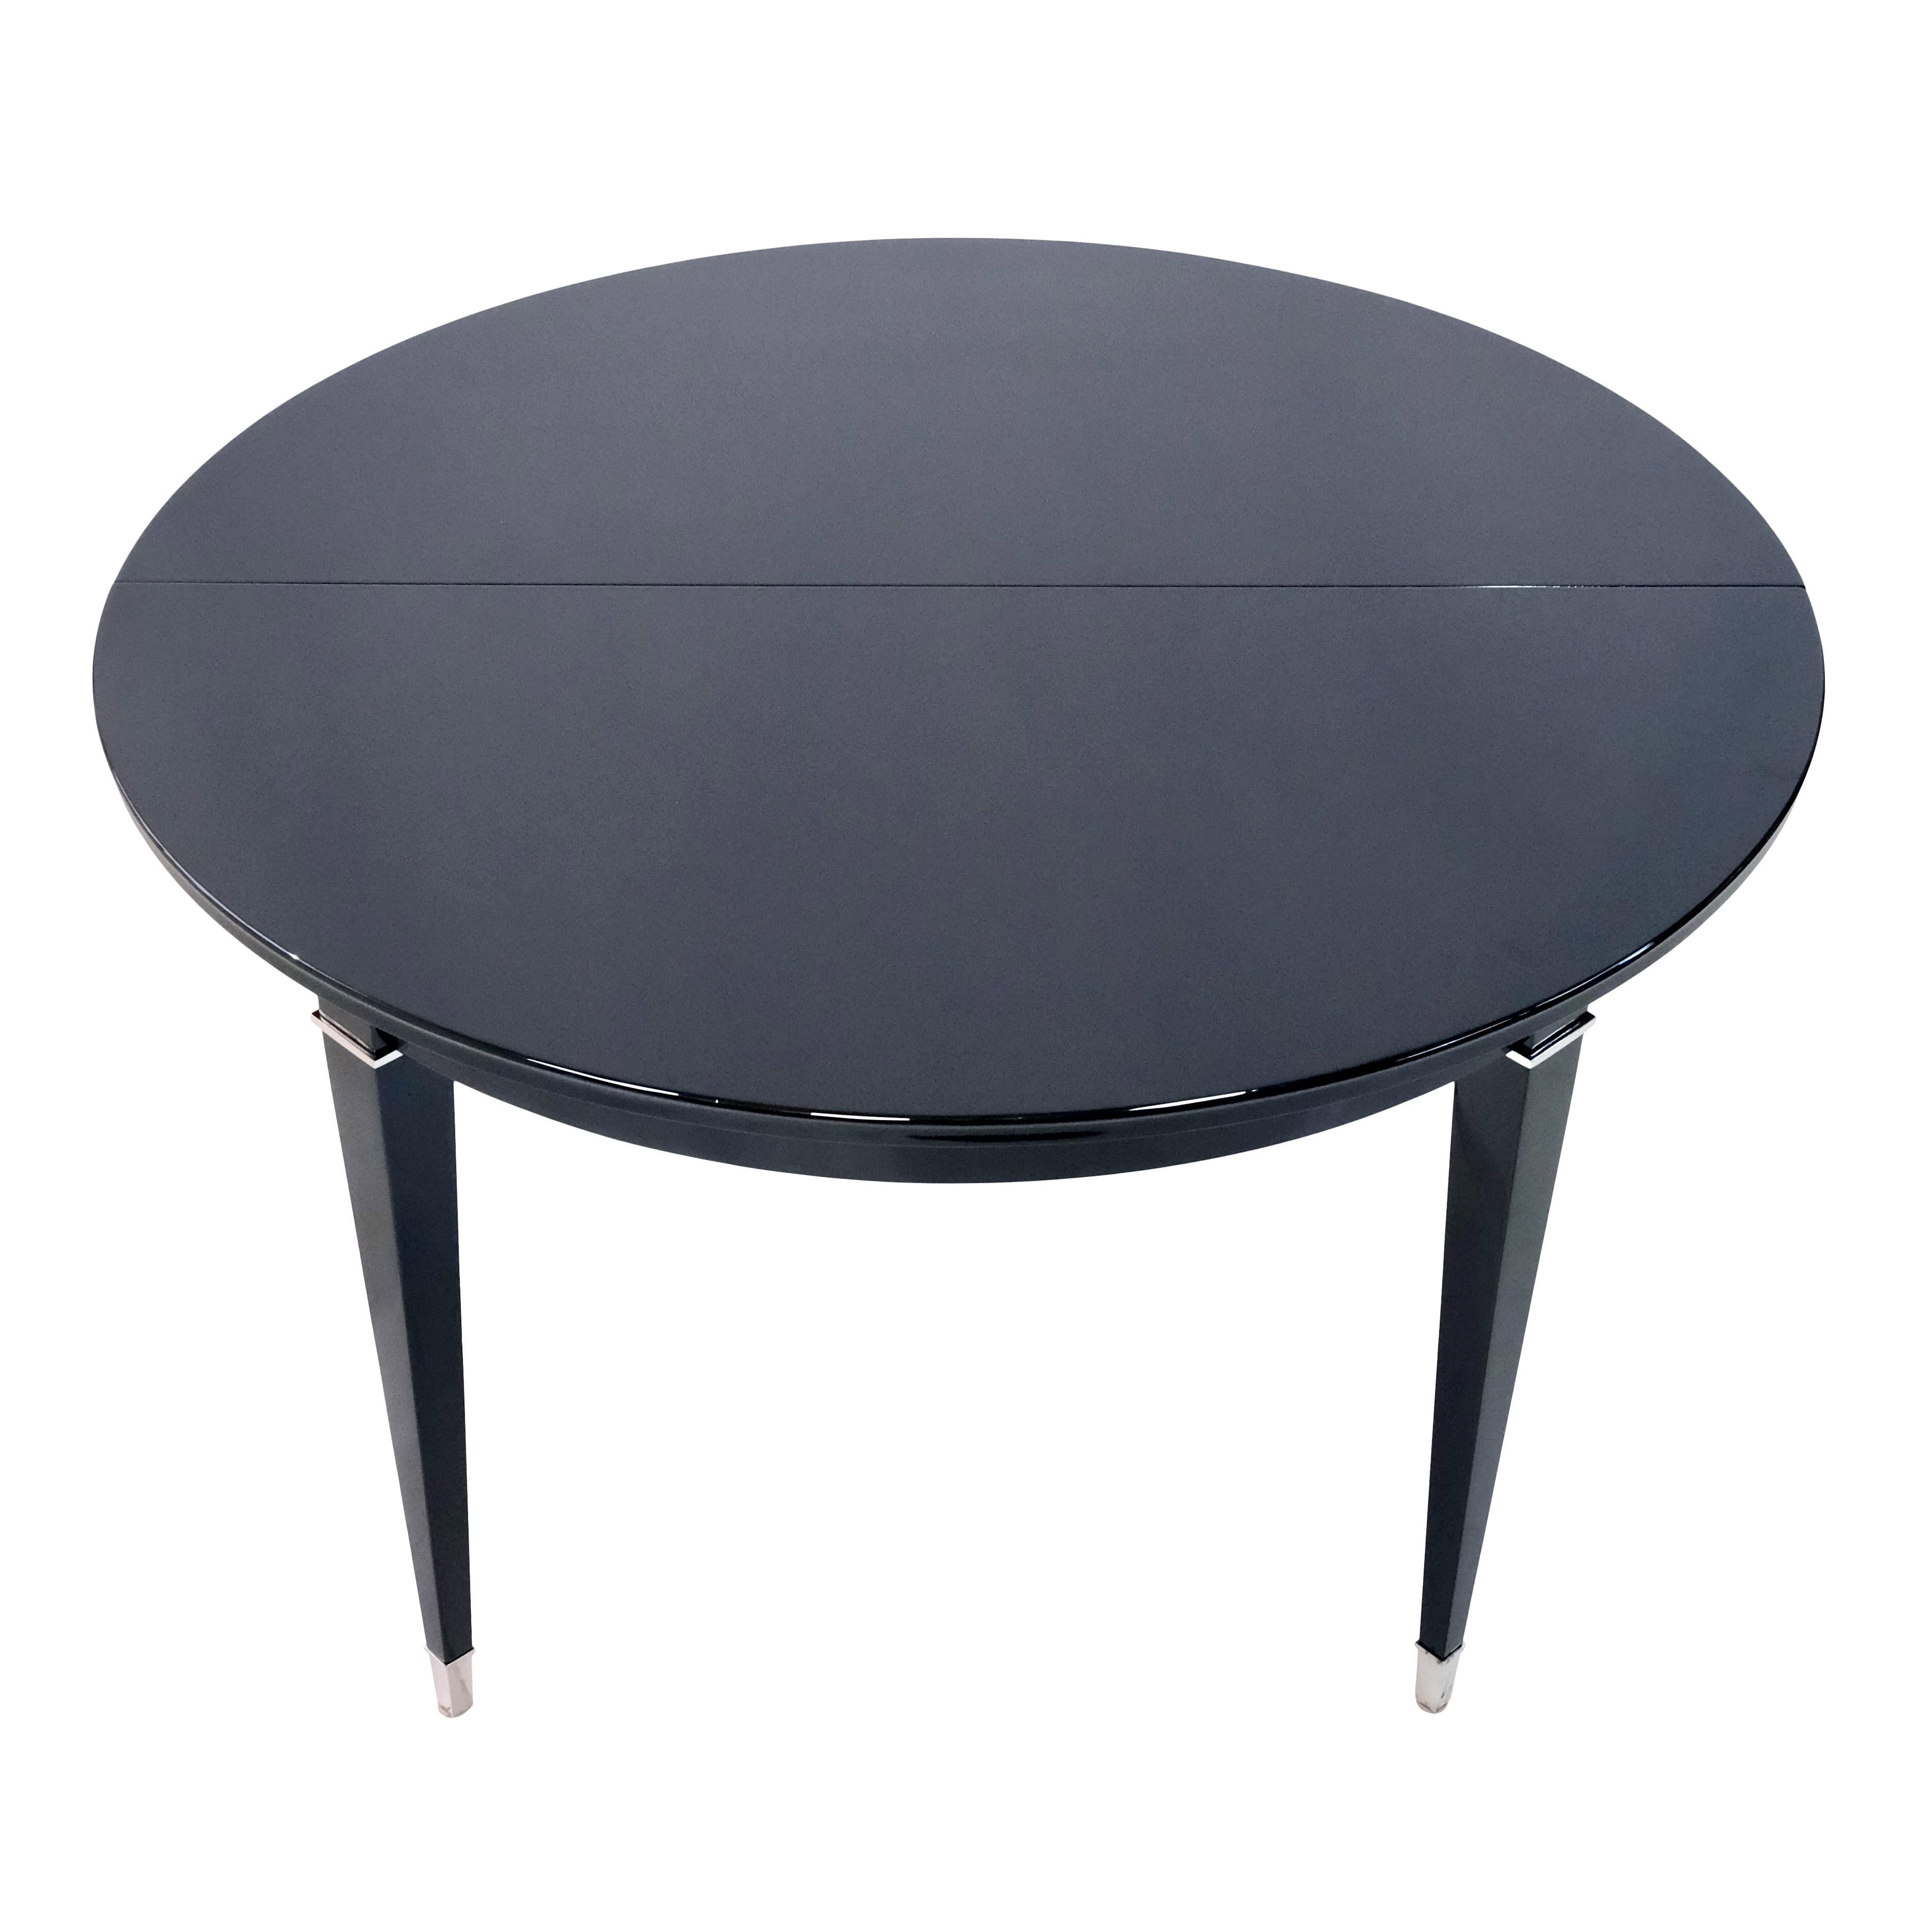 Round dining table with extension (50cm) 
Wood in Black Piano Lacquer 
Fittings, nickeled

Original Art Deco, France 1930s

The table can also be used as a nice center table at your entrance. 

Dimensions:
Diameter: 115 cm 
Height: 73